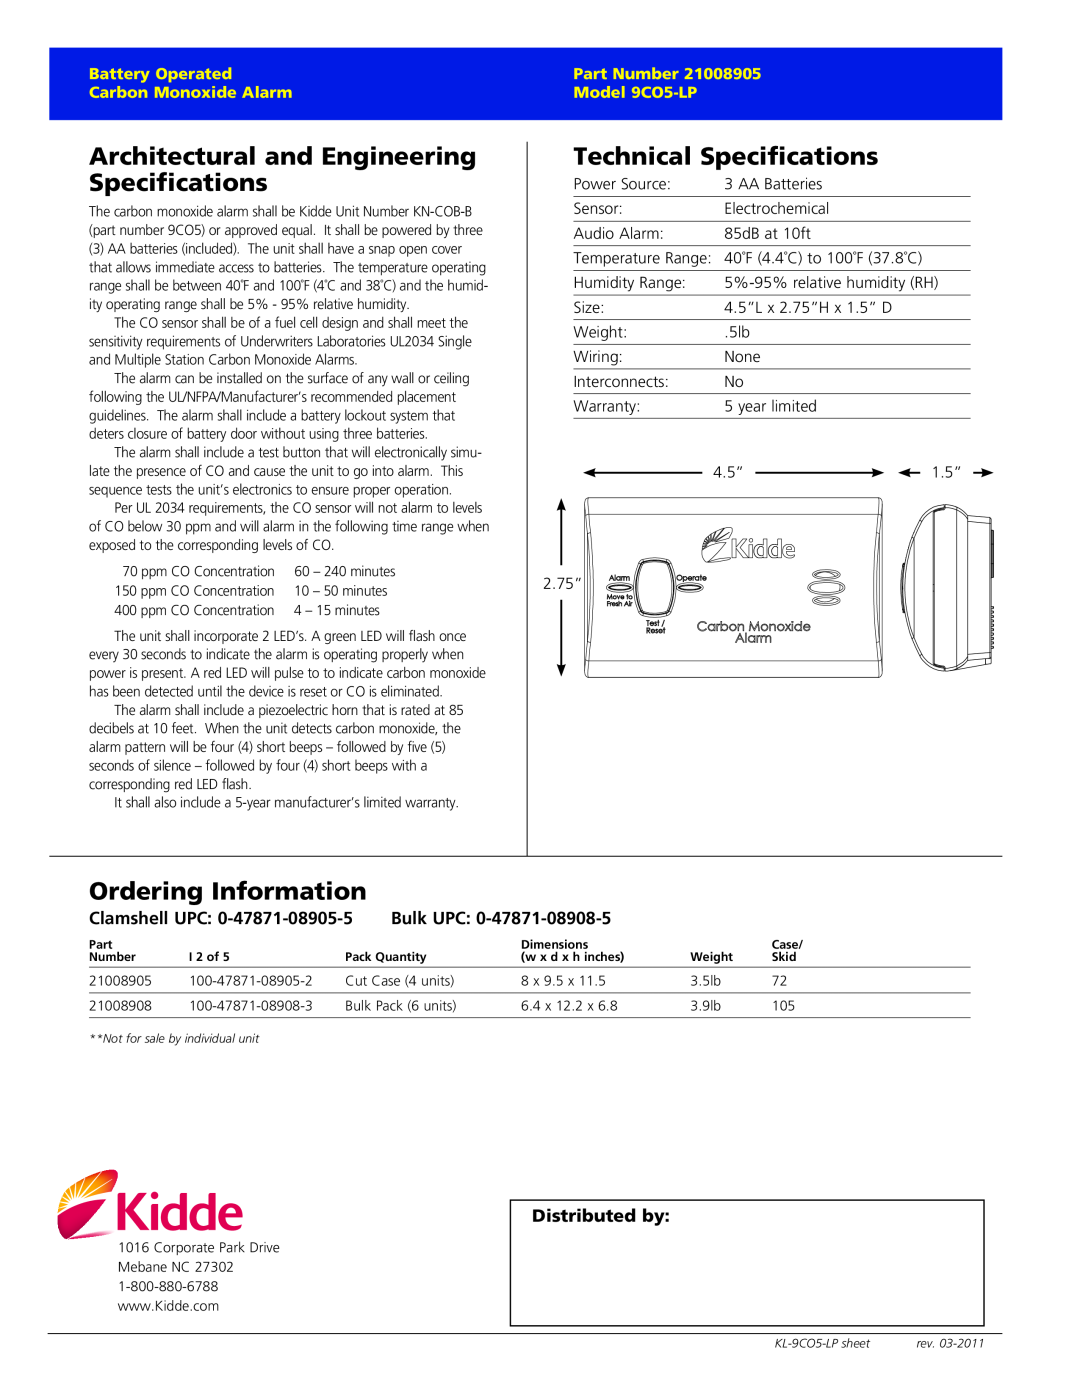 Kidde 9CO5-LP Architectural and Engineering Specifications, Technical Specifications, Ordering Information, Clamshell UPC 